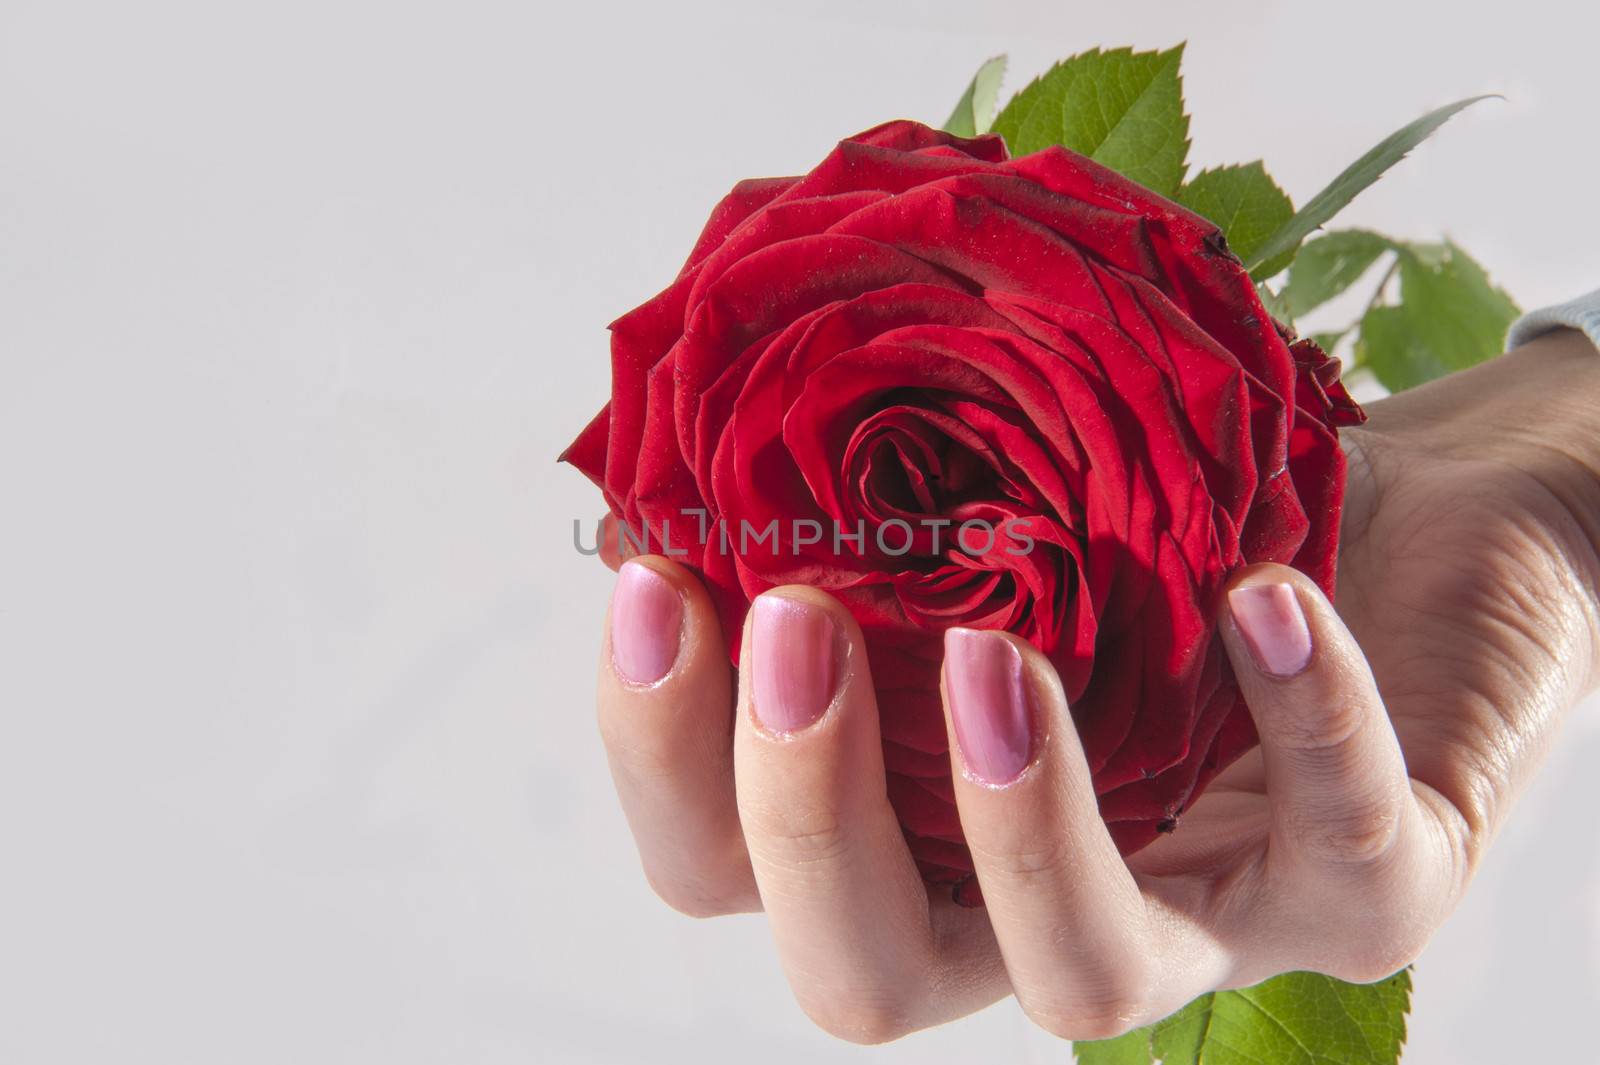 Rose in a hand by Alenmax